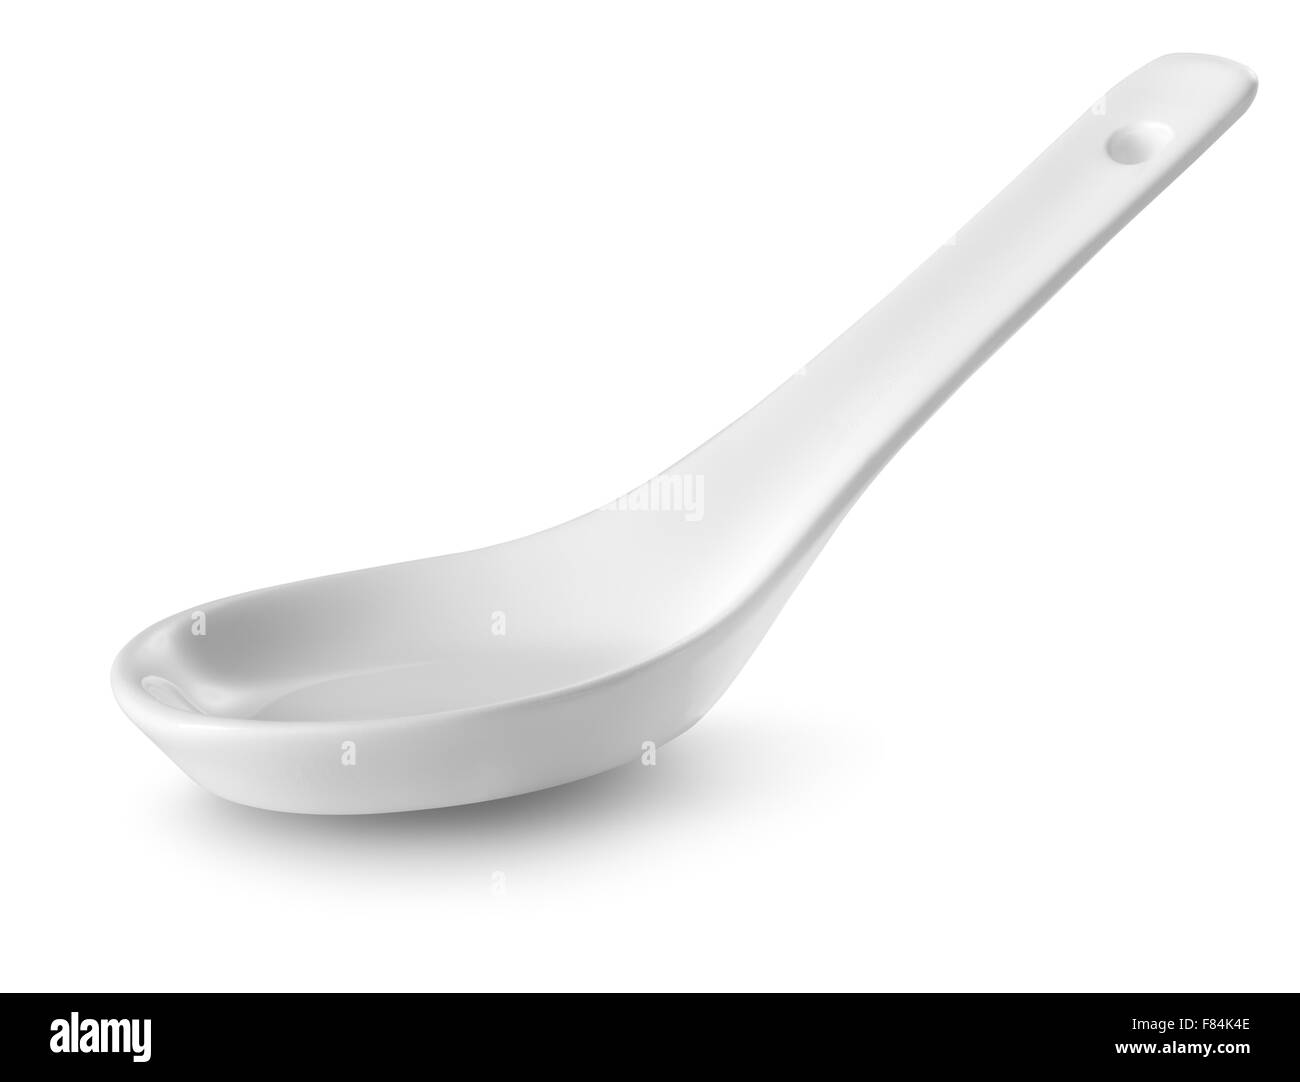 Ceramic spoon isolated on a white background Stock Photo